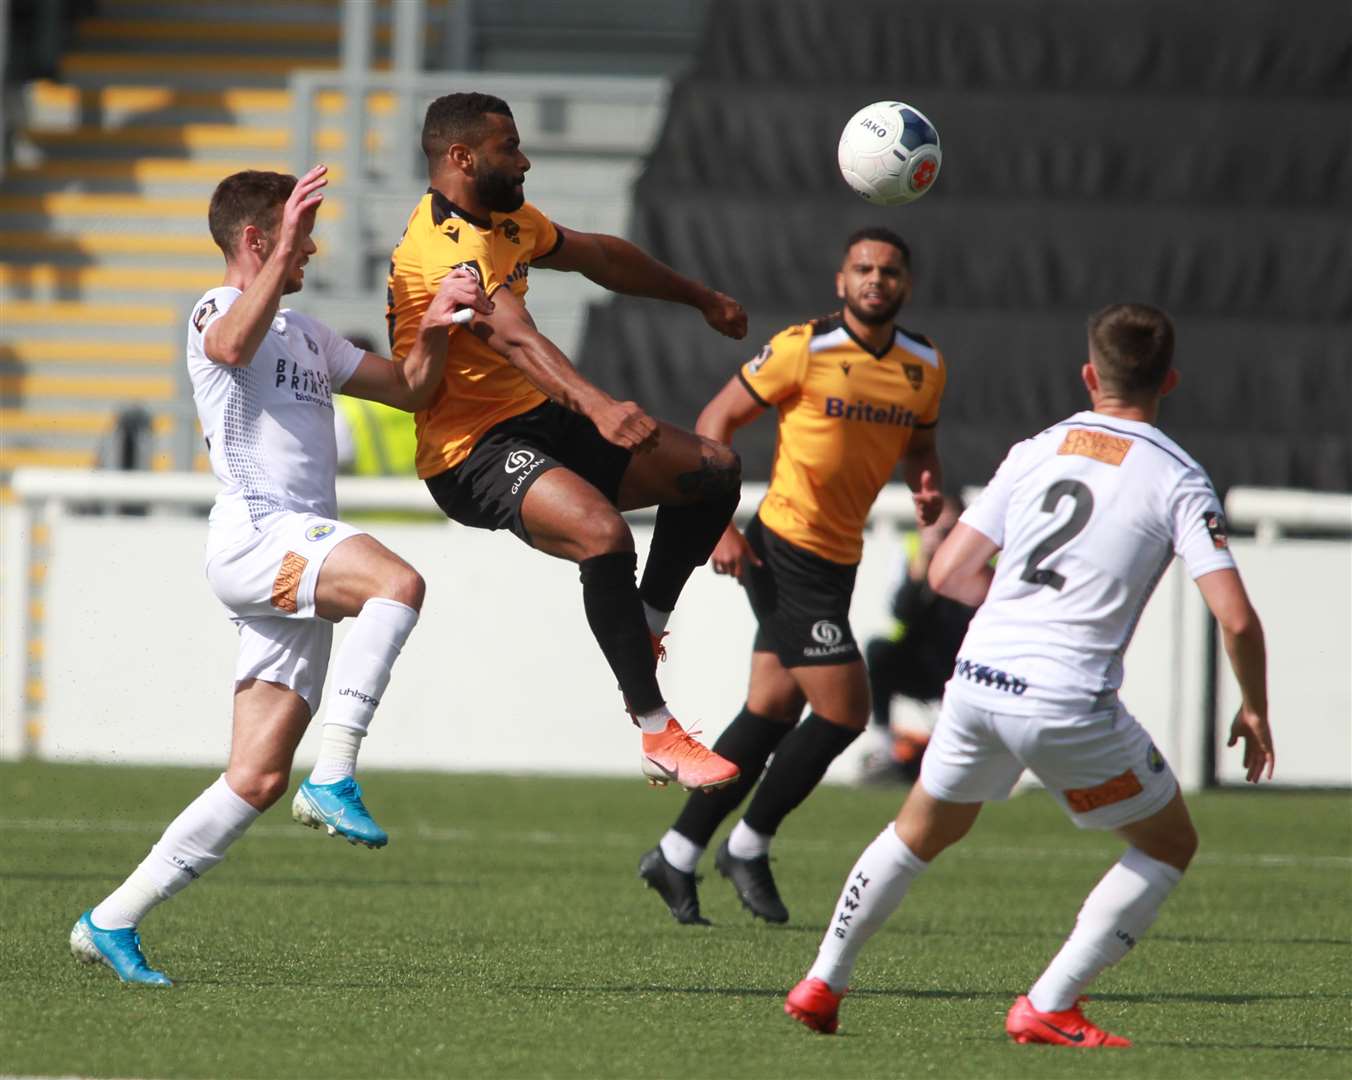 Dan Wishart scored Maidstone's late equaliser at the Gallagher Picture: John Westhrop